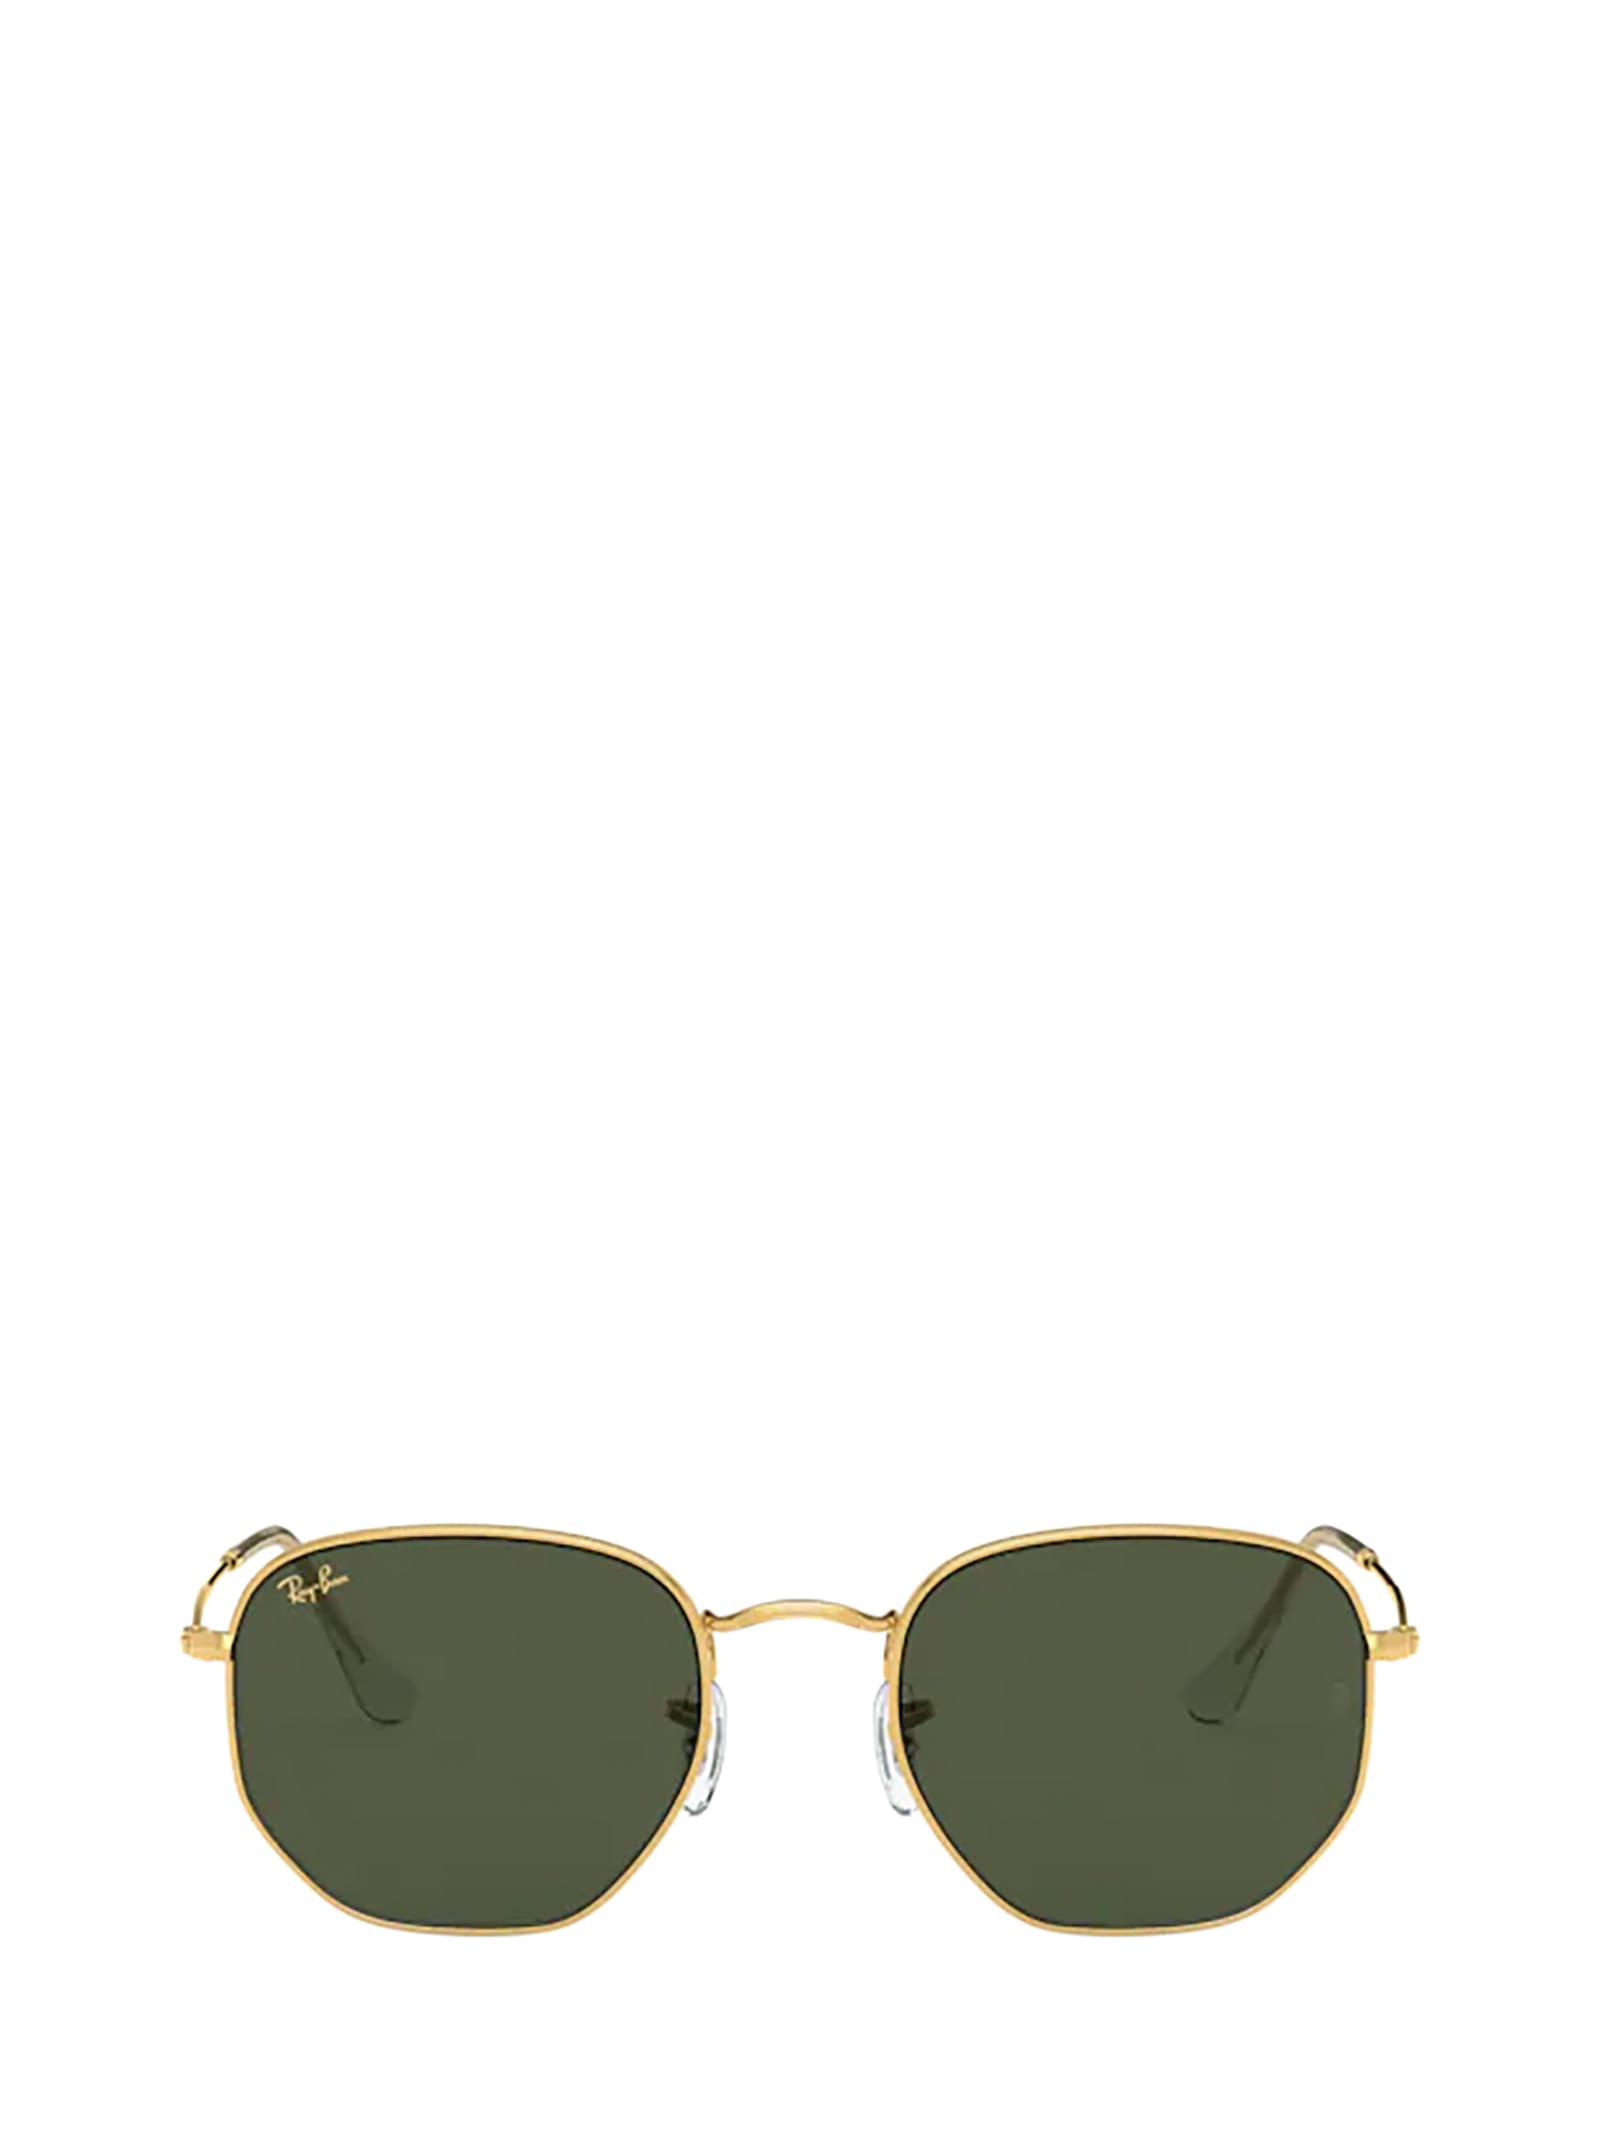 Ray-Ban Ray-ban Rb3548 Legend Gold Sunglasses